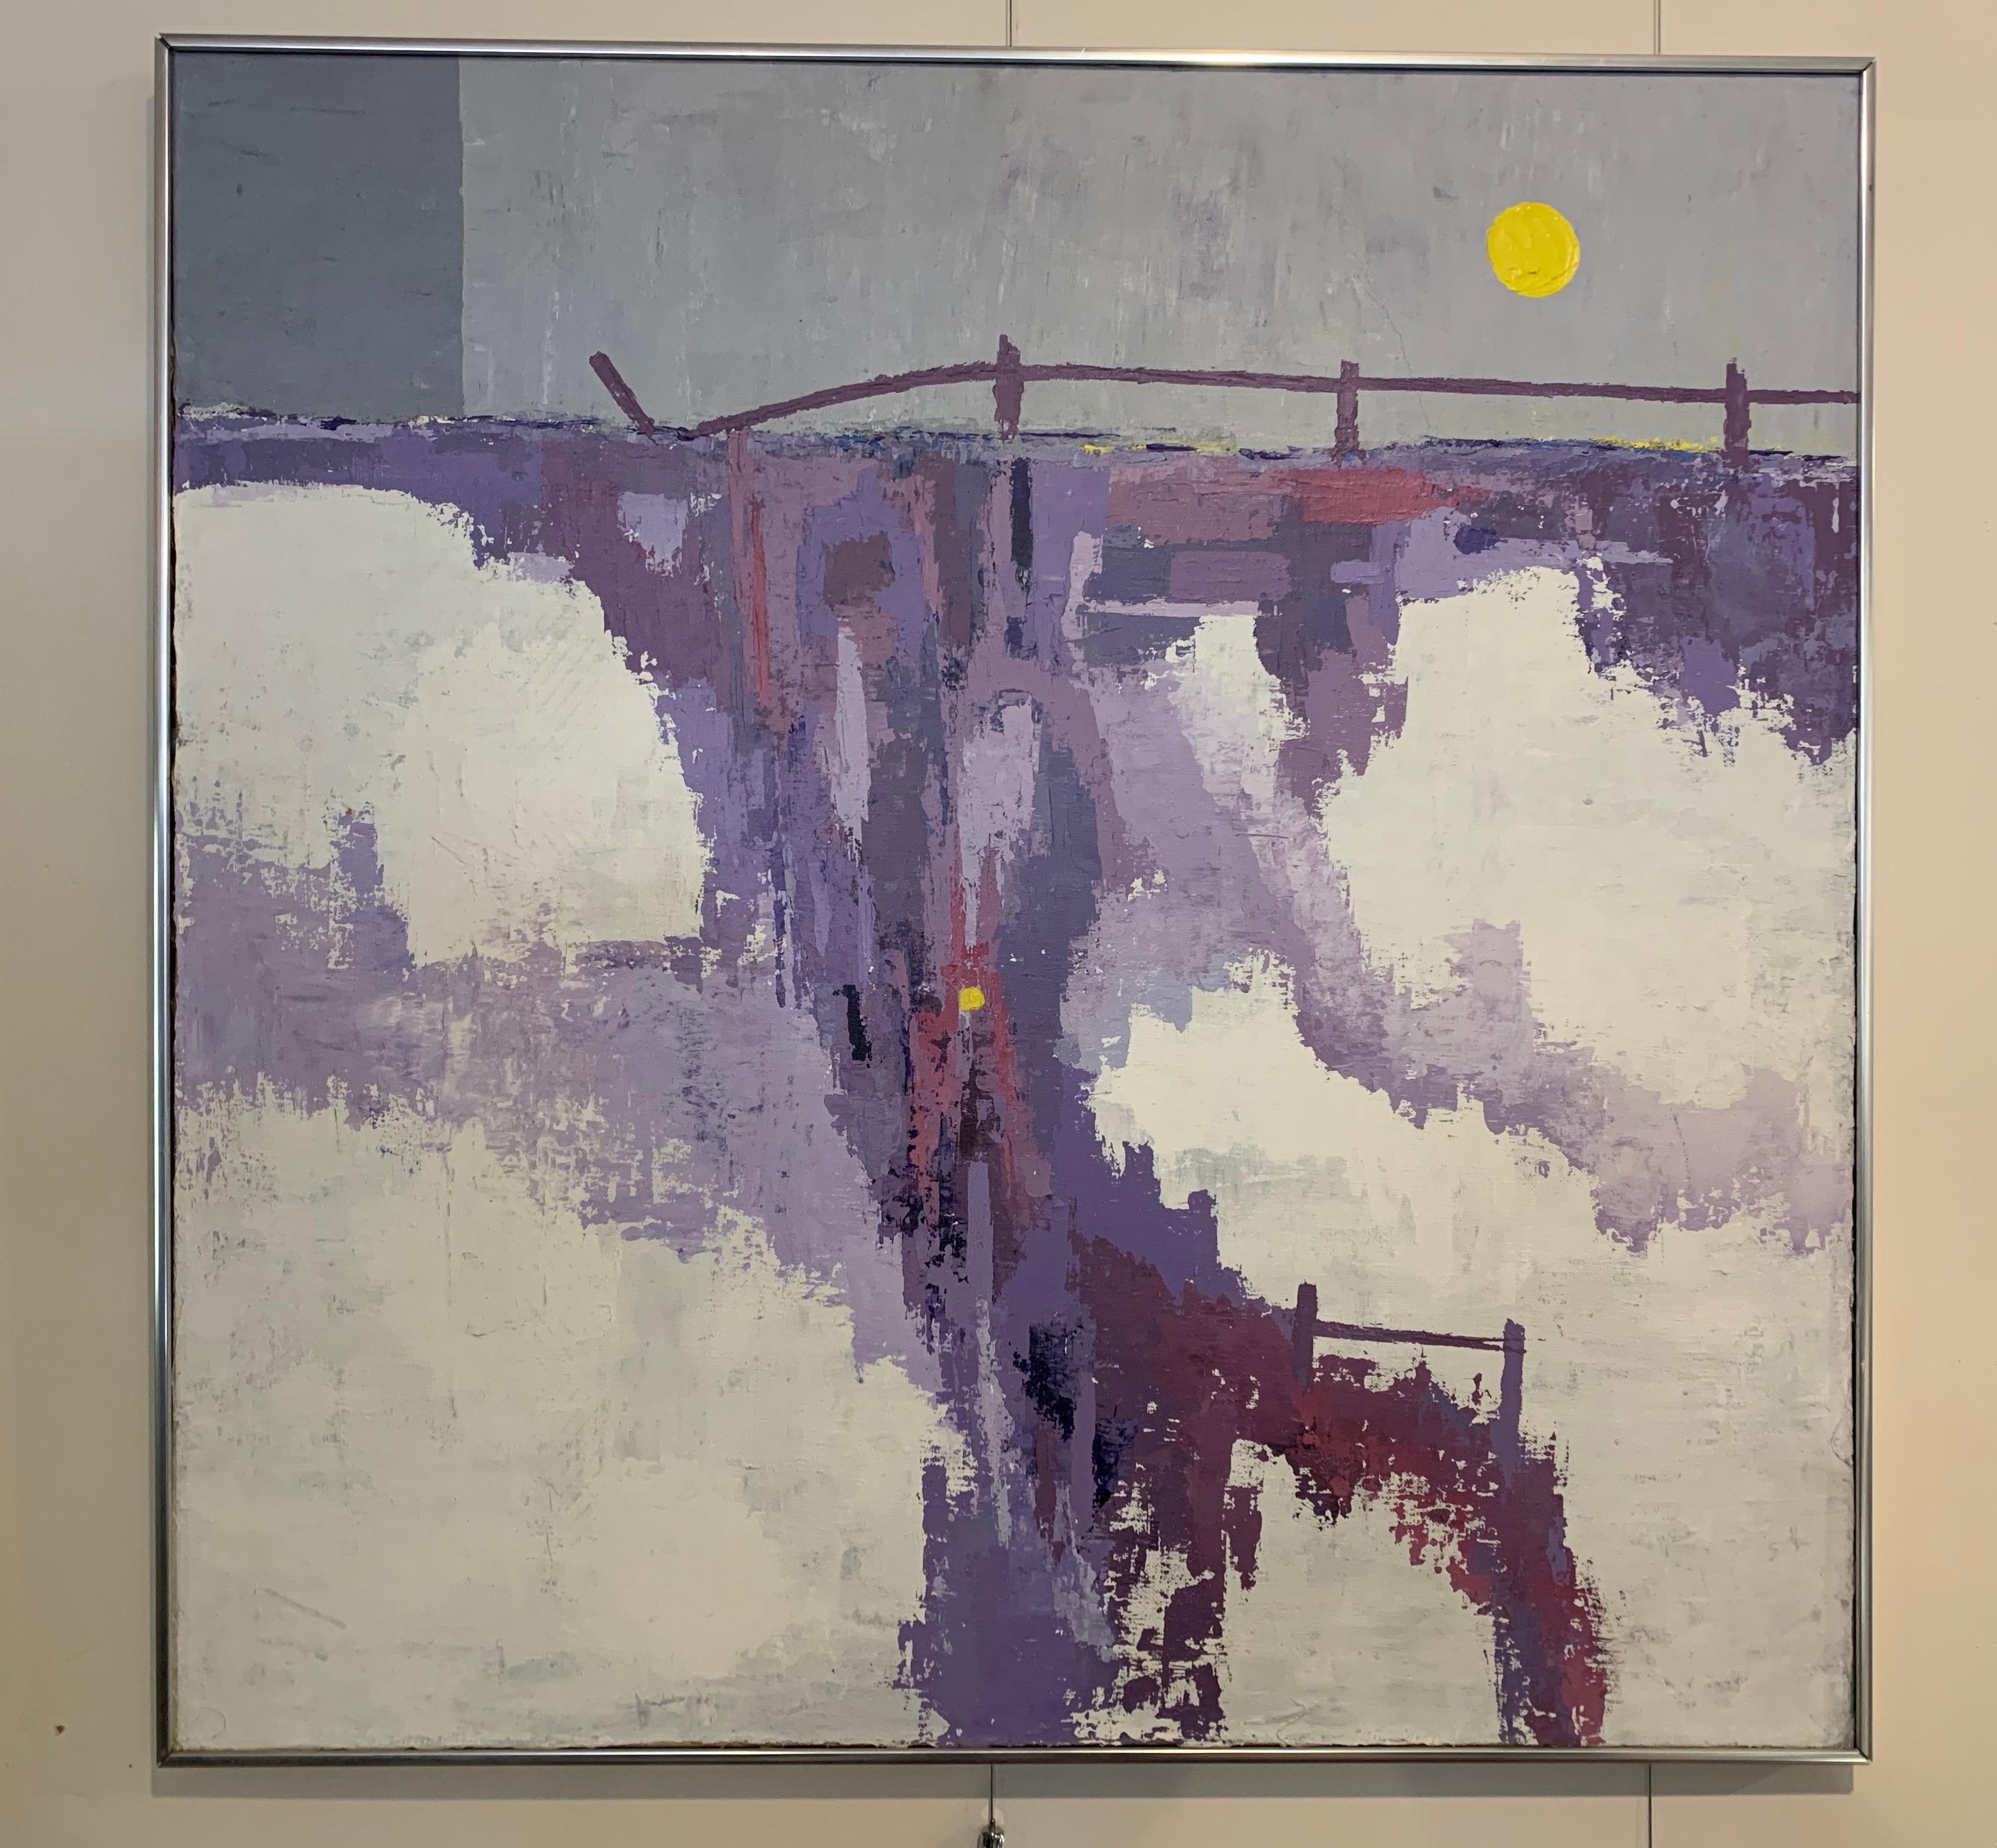 A true period oil on canvas original painting, circa 1960s and in original frame. What sets this original abstract painting art are the vivid colors highlighted by the color lavender and purple. The artist signature is at bottom left center but is